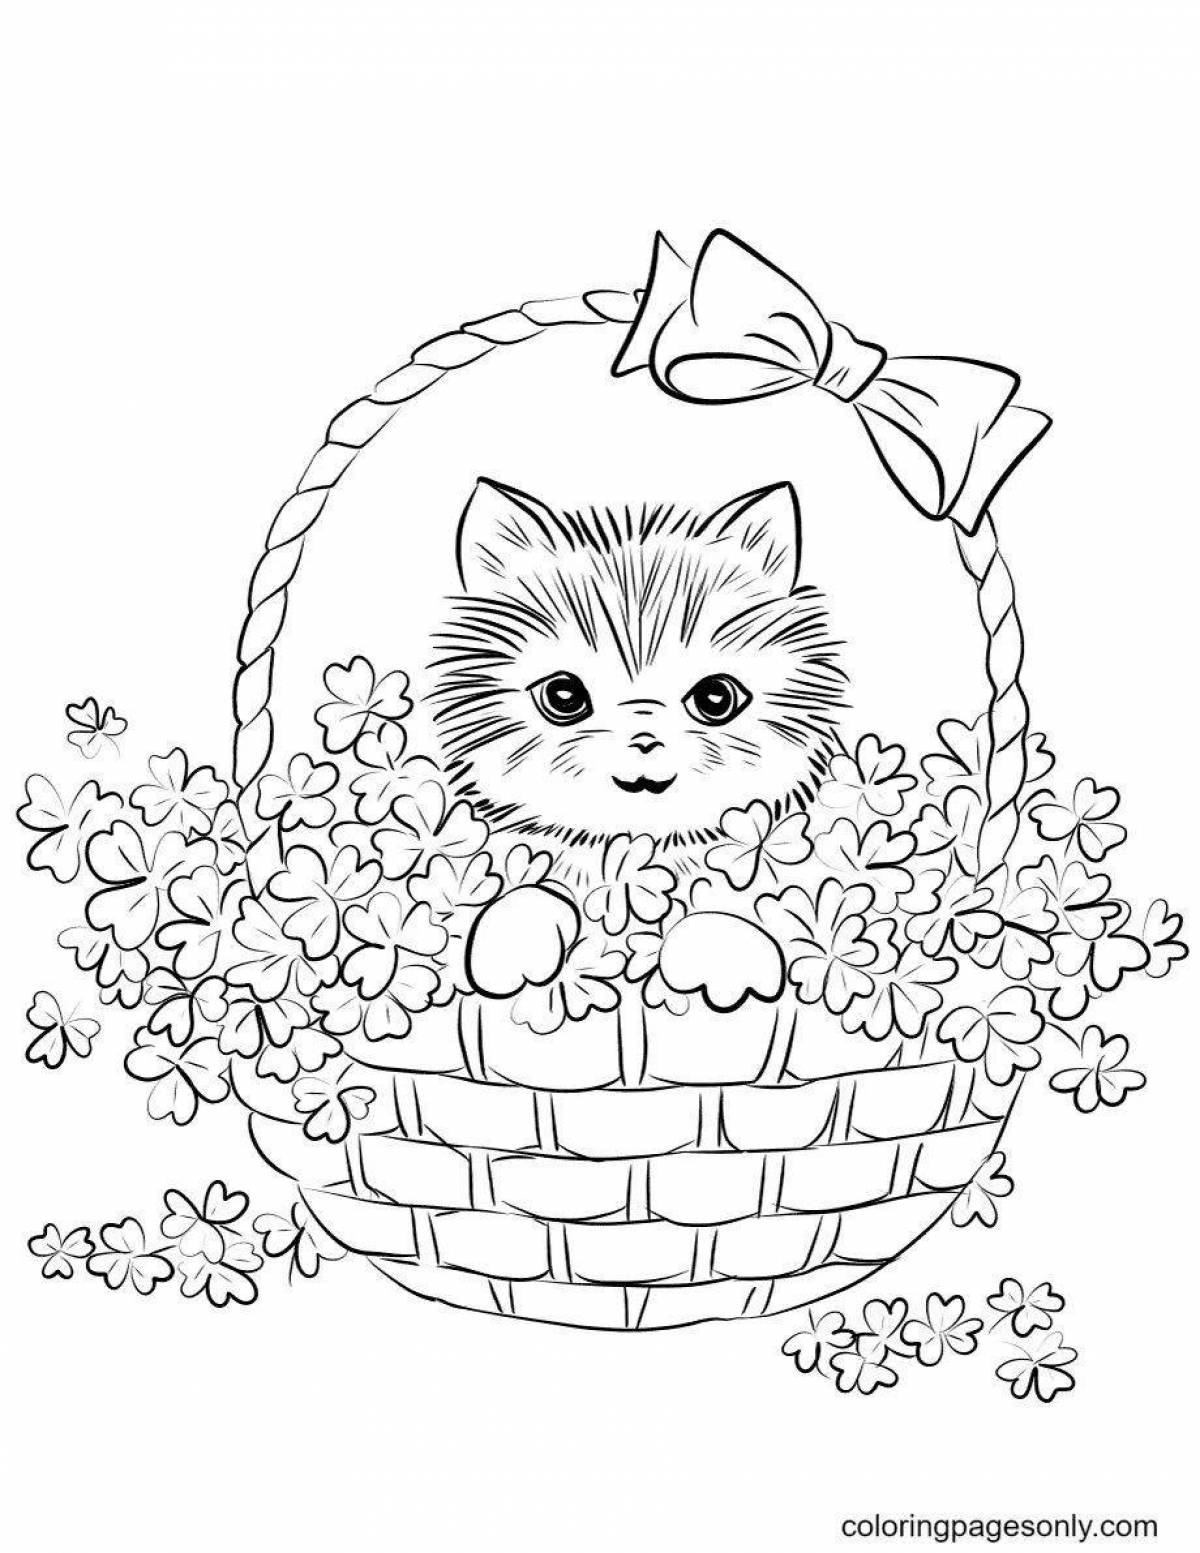 Coloring page loving cat in a basket